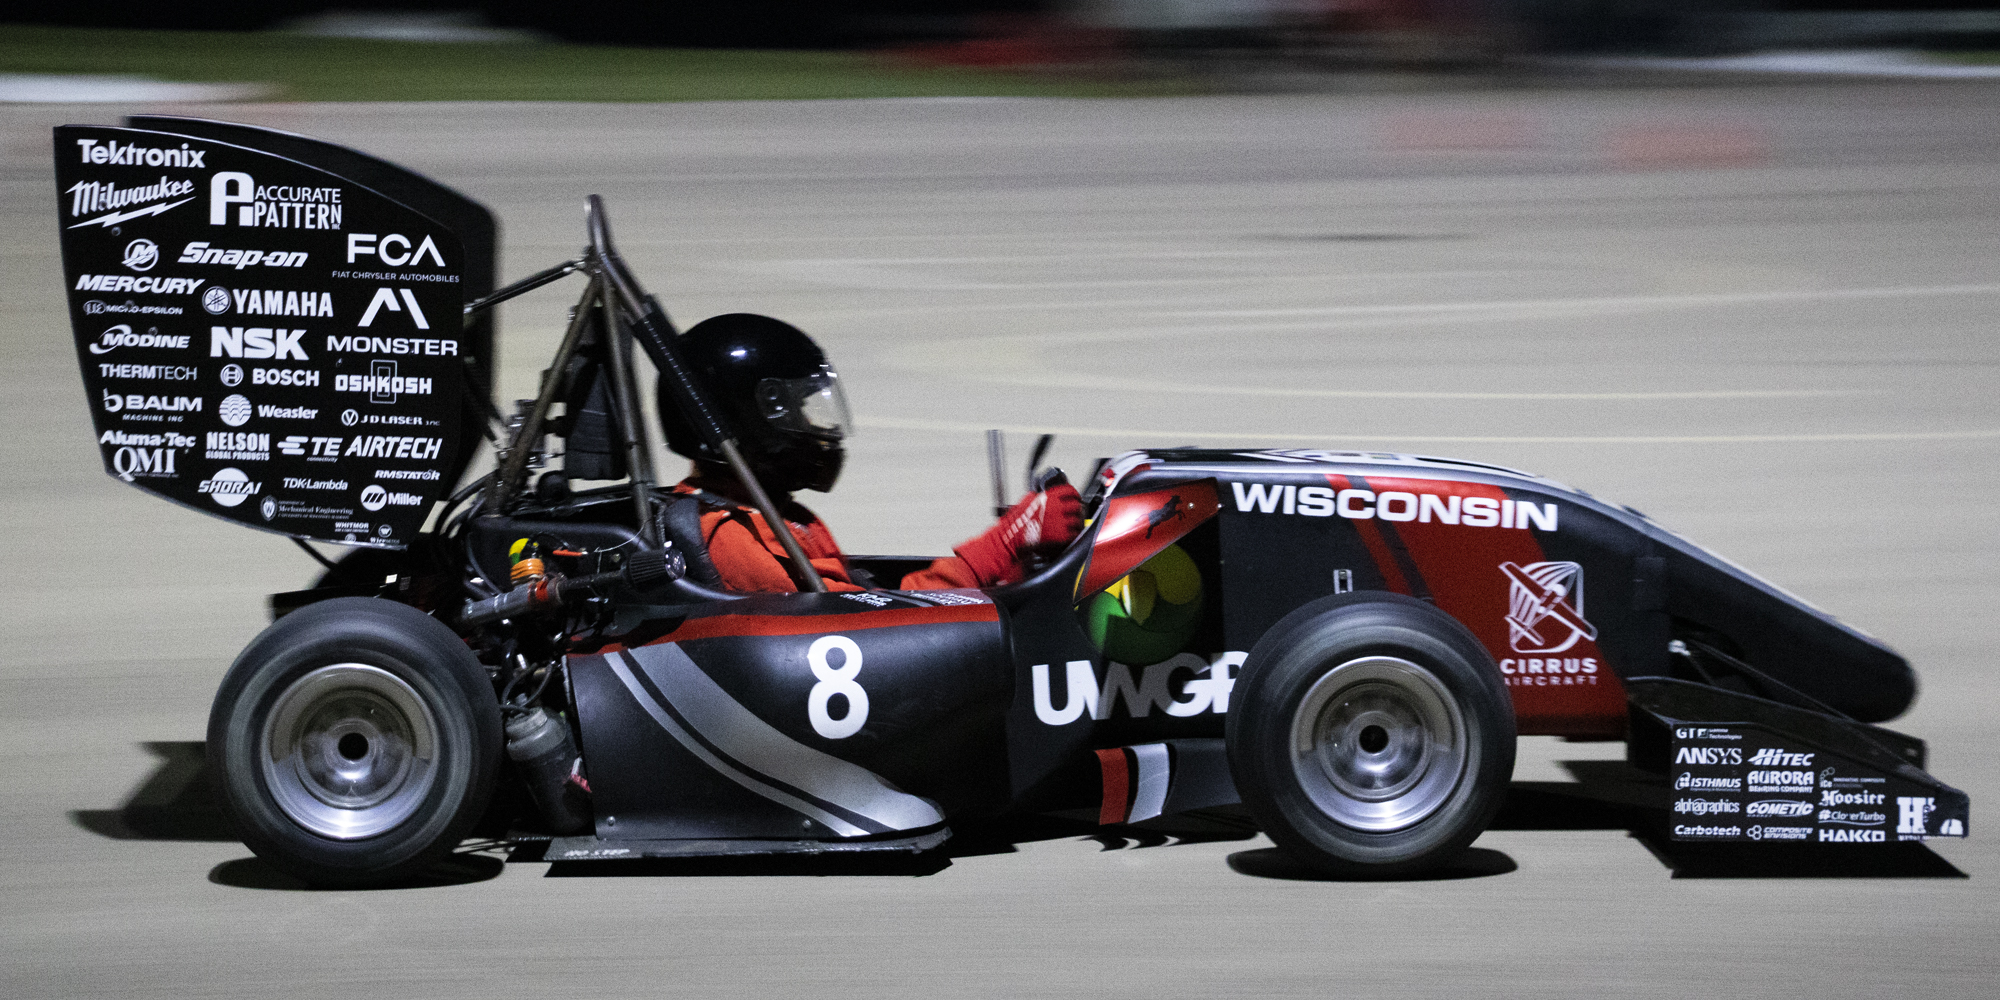 In 2019, the team suffered a serious setback during manufacturing, severely limiting our testing time. Nonetheless, we persevered and successfully campaigned the WR-219 at FSAE Michigan, capping off a rebuilding year for the team.